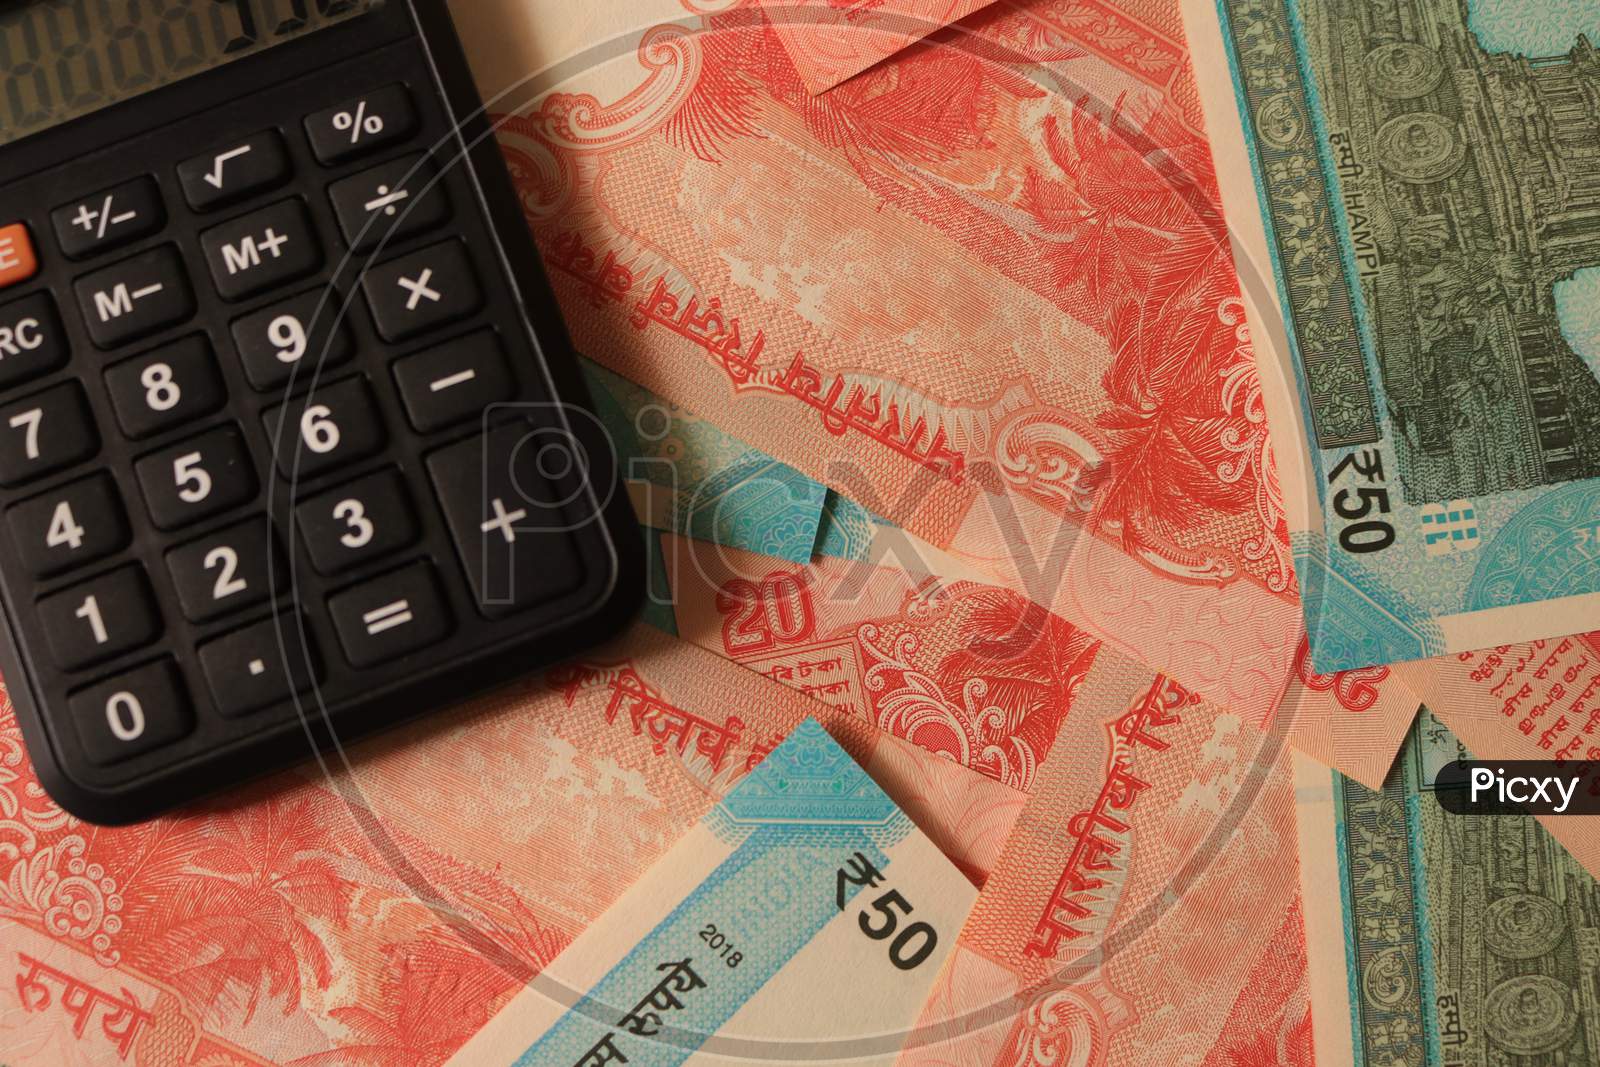 Indian Currency Notes with Calculator